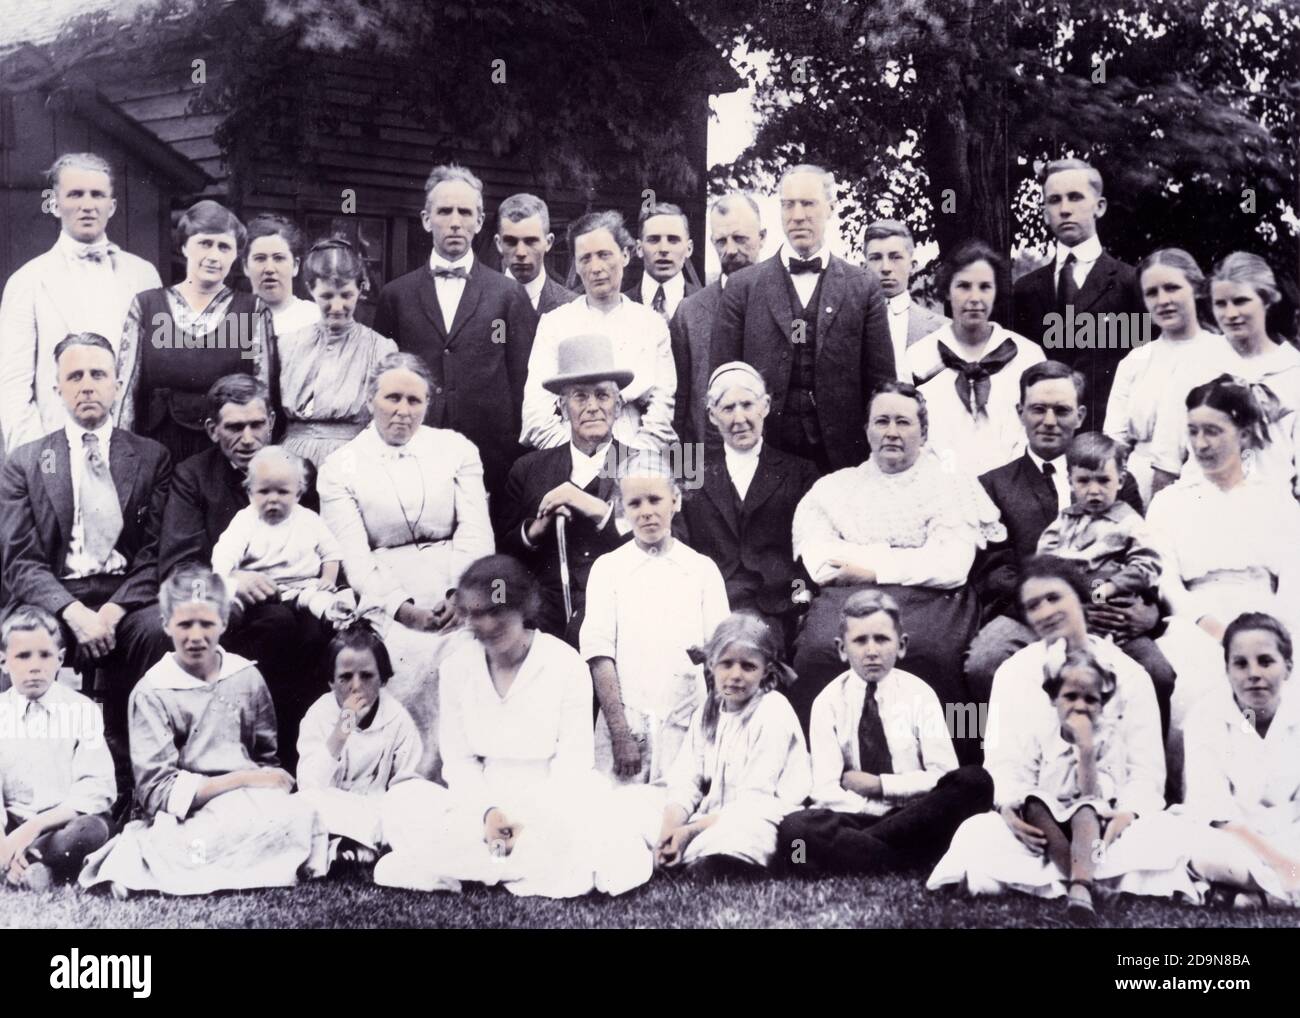 1900s GROUP PORTRAIT OF MULTI-GENERATION FAMILY GATHERED AROUND MAN PATRIARCH FOR REUNION PHOTOGRAPH ALL LOOKING AT CAMERA - ko2594 HAR001 HARS COLOR MOTHERS SENIORS OLD TIME FUTURE NOSTALGIA OLD FASHION JUVENILE YOUNG ADULT GENERATIONS INFANT FAMILIES JOY LIFESTYLE CELEBRATION ELDER FEMALES MARRIED RURAL SPOUSE HUSBANDS HOME LIFE COPY SPACE FRIENDSHIP HALF-LENGTH LADIES PERSONS MALES TEENAGE GIRL TEENAGE BOY SENIOR MAN SENIOR ADULT FATHERS REUNION 1800s PARTNER EYE CONTACT SENIOR WOMAN HAPPINESS OLD AGE OLDSTERS OLDSTER TURN OF THE 20TH CENTURY DADS PRIDE YOUNG AND OLD GENERATION Stock Photo